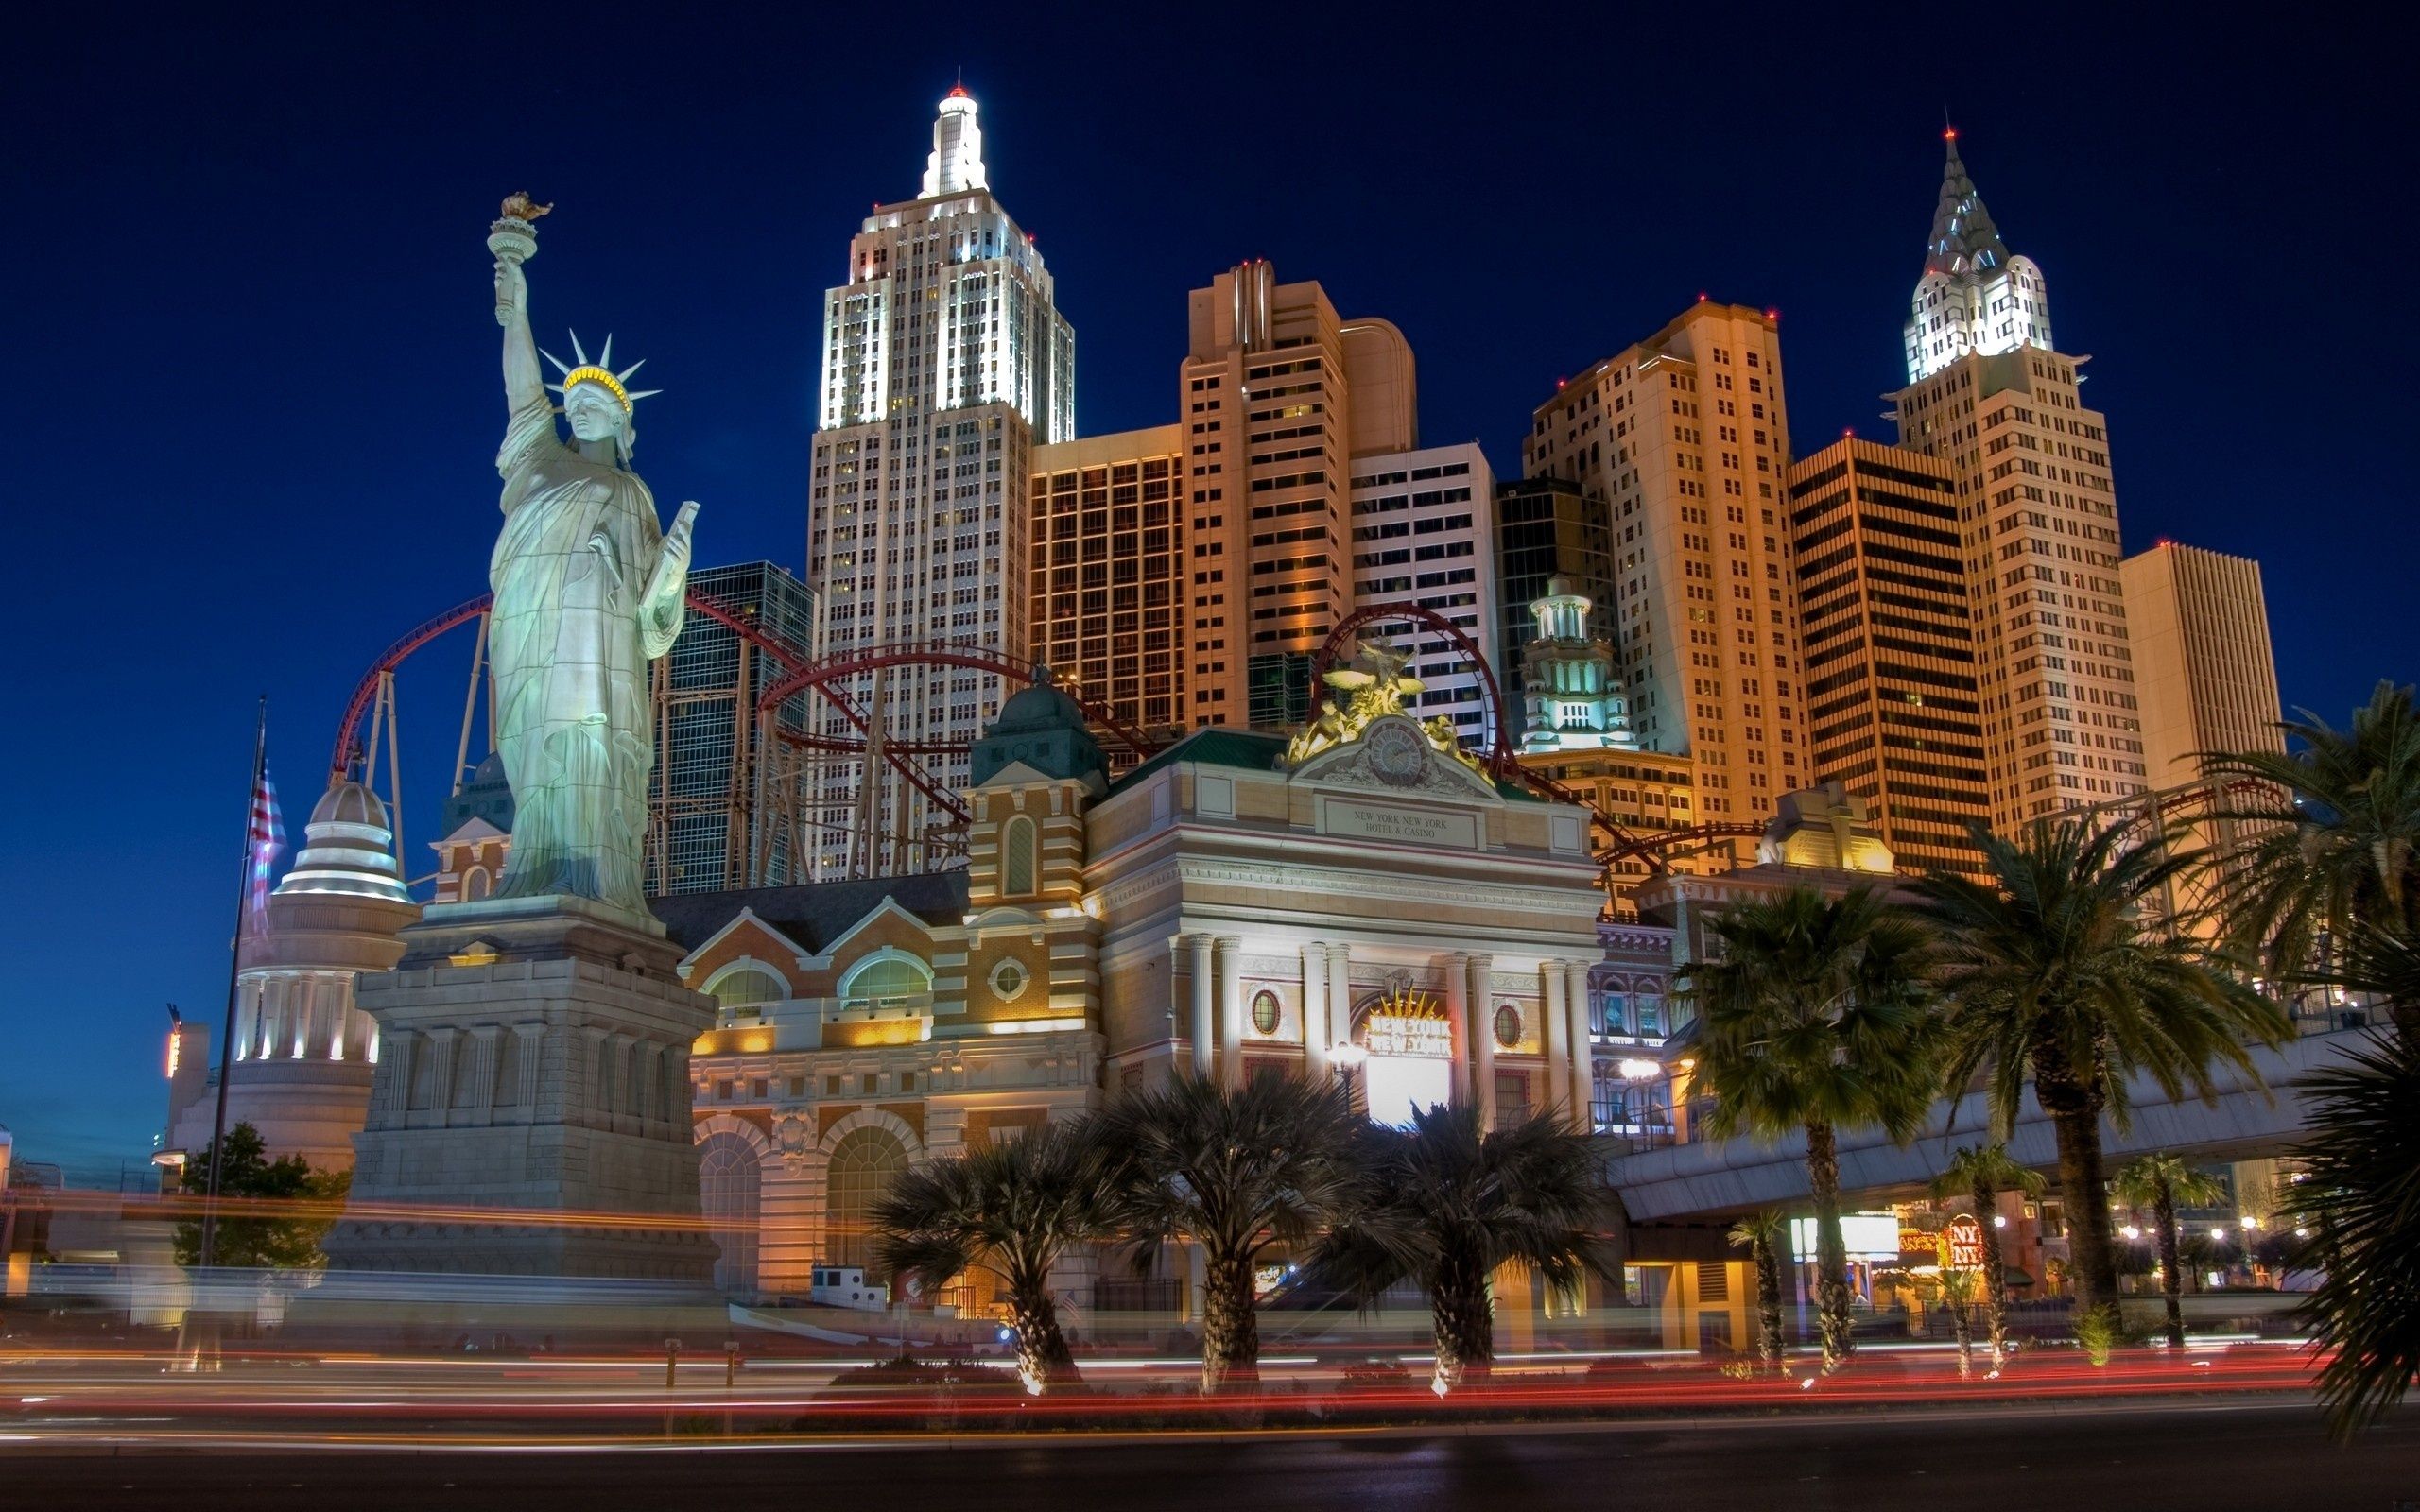 A cityscape with a large building and a replica of the Statue of Liberty. - Las Vegas